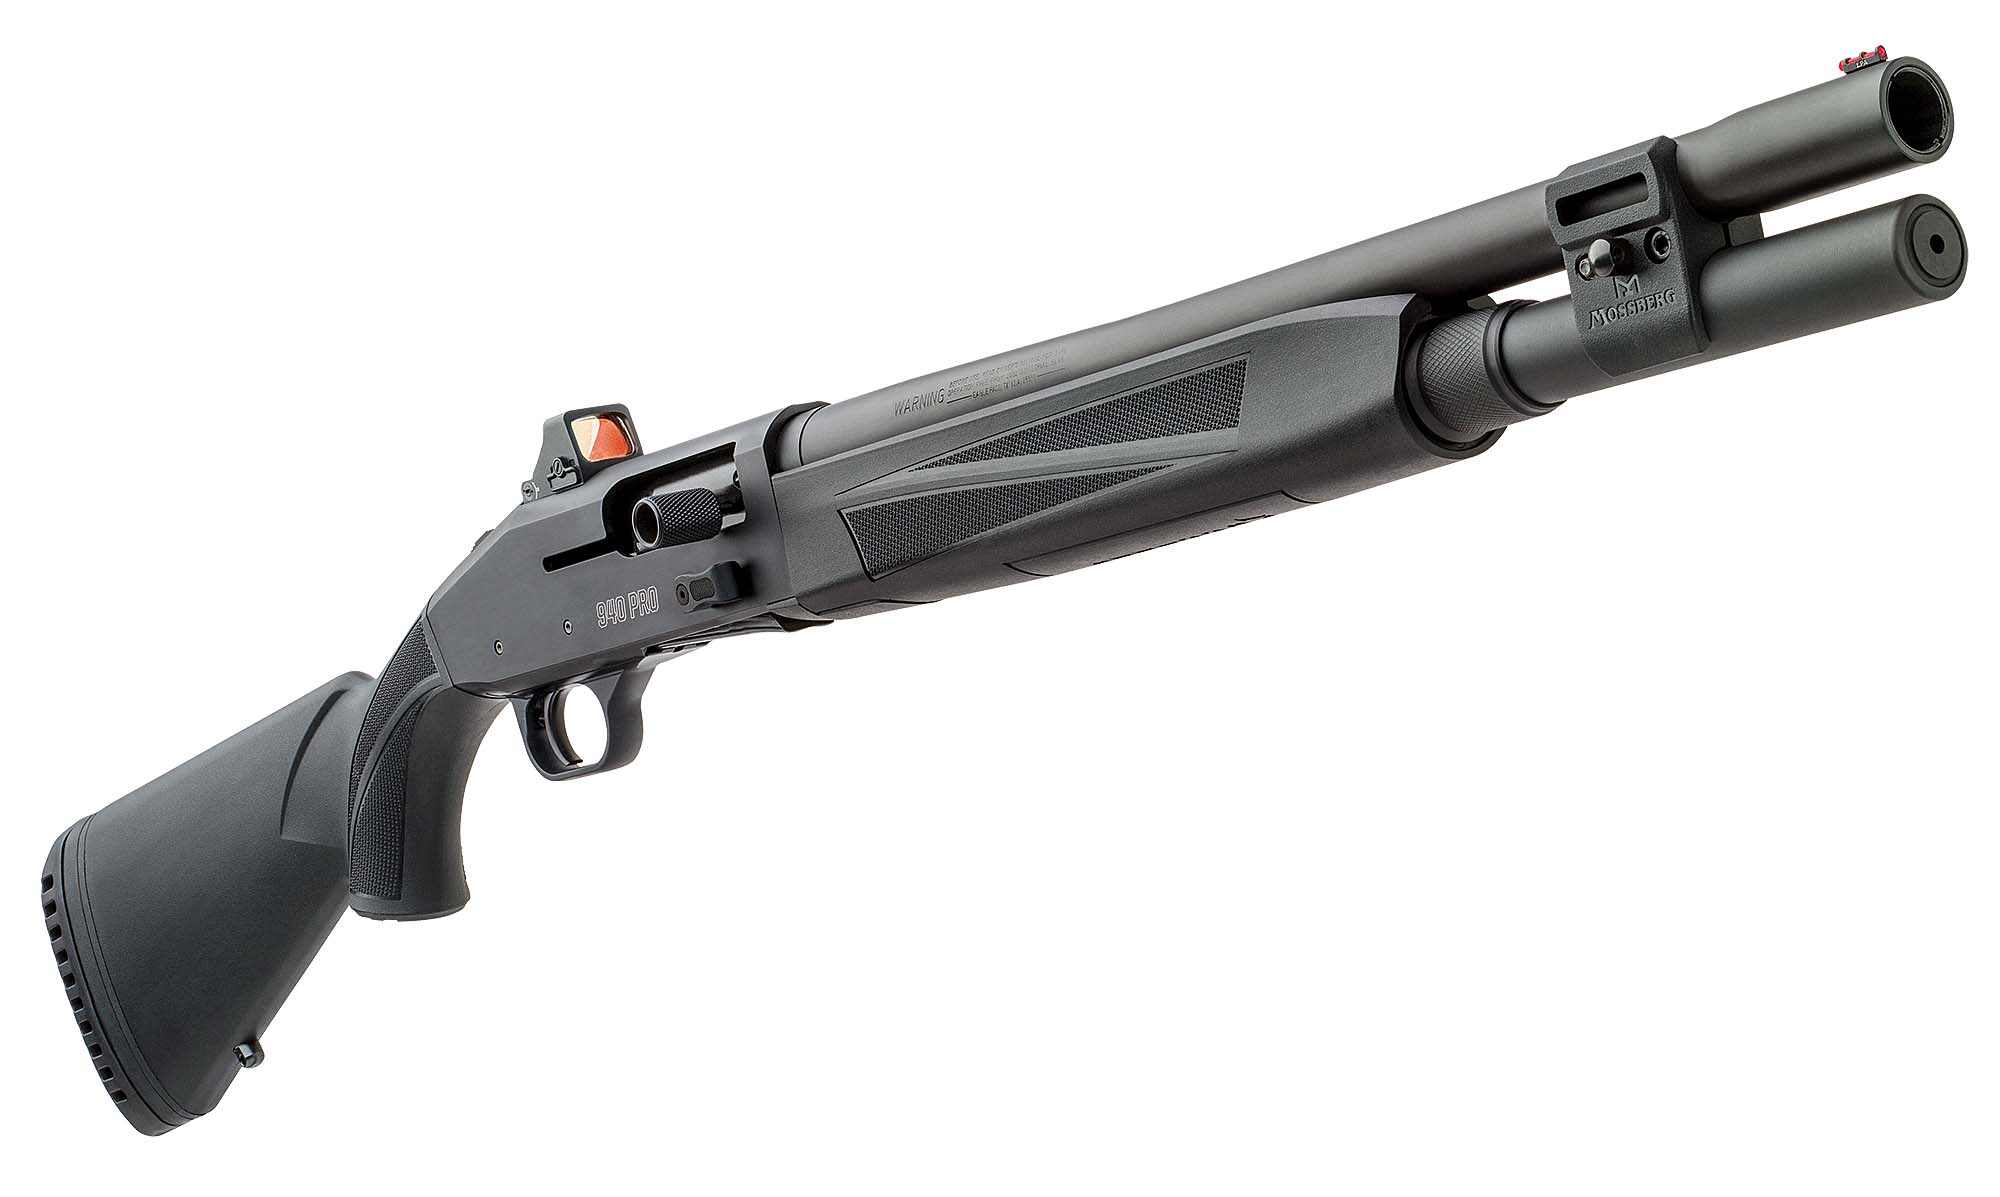 Mossberg's new auto-loader, the 940 Pro Tactical, was built for personal defense and competition.